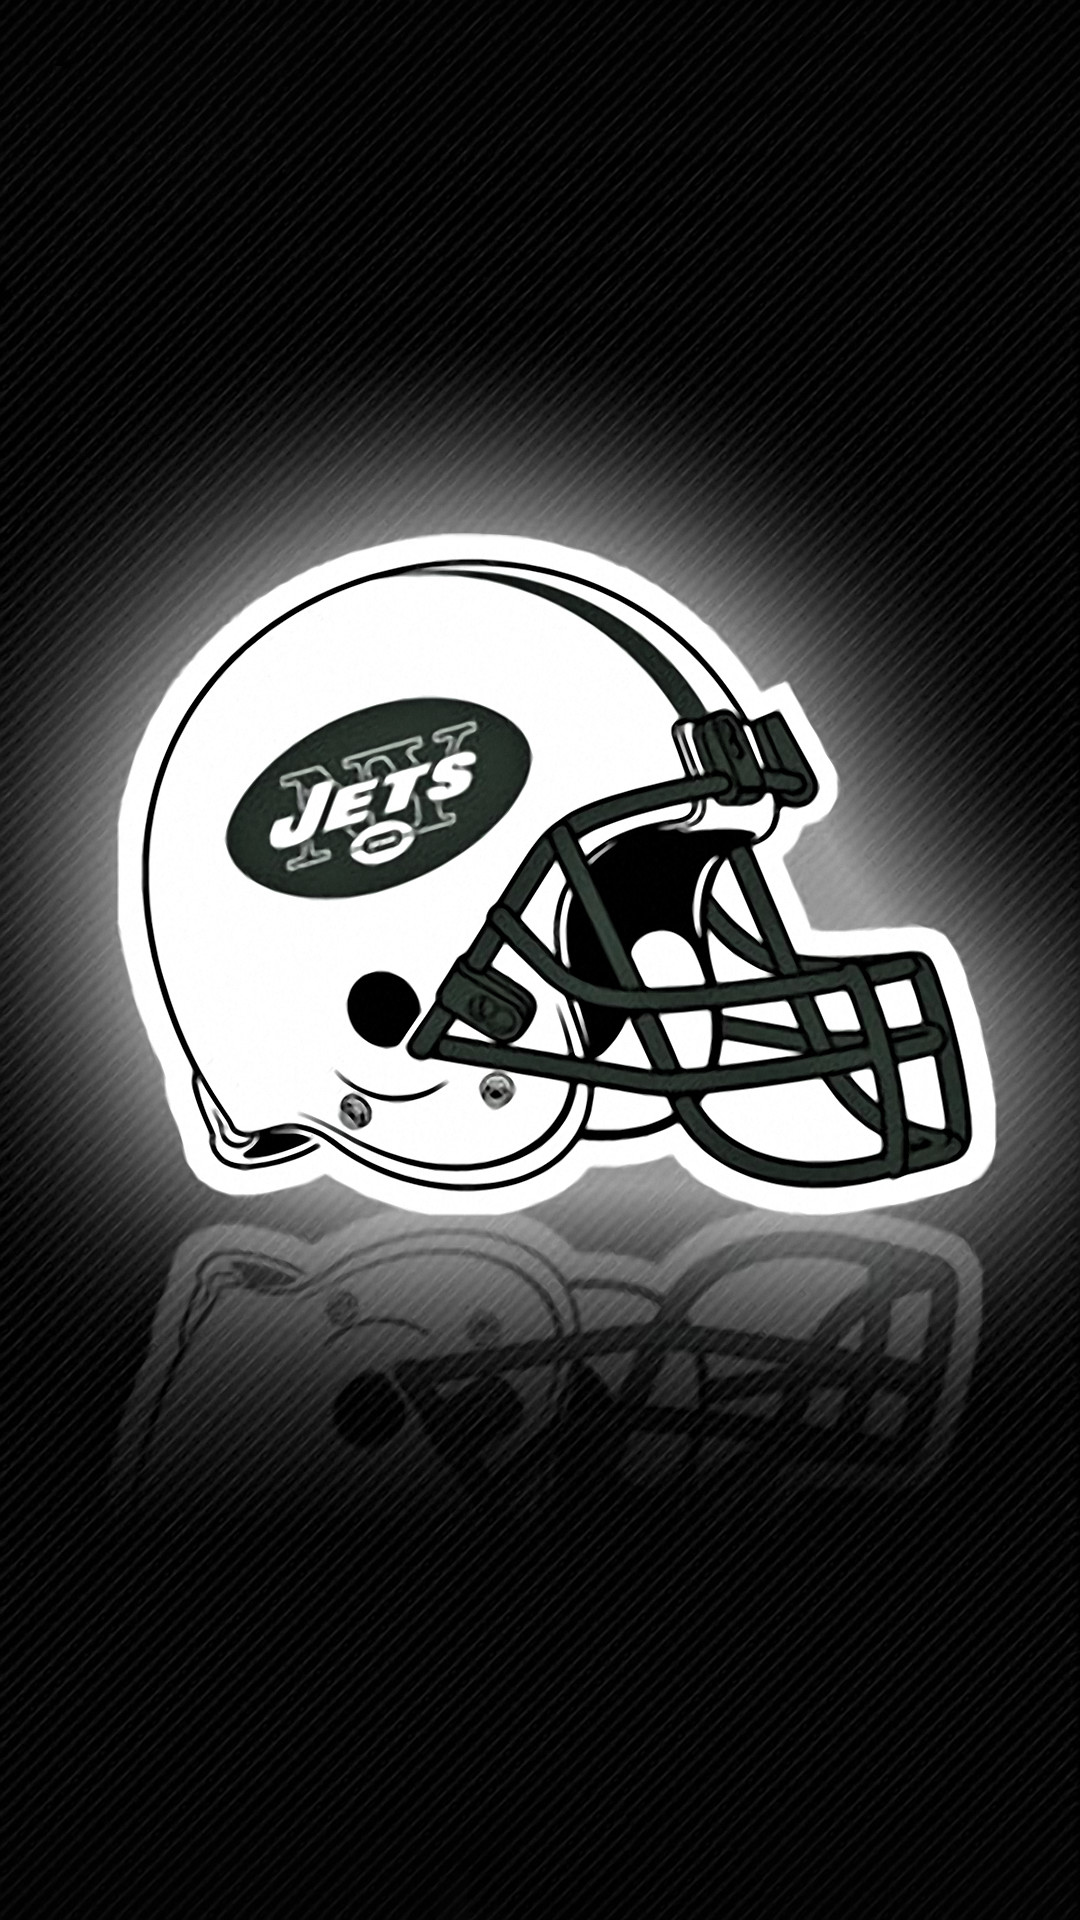 1080x1920 NY Jets iPhone 6 Plus Wallpaper ()